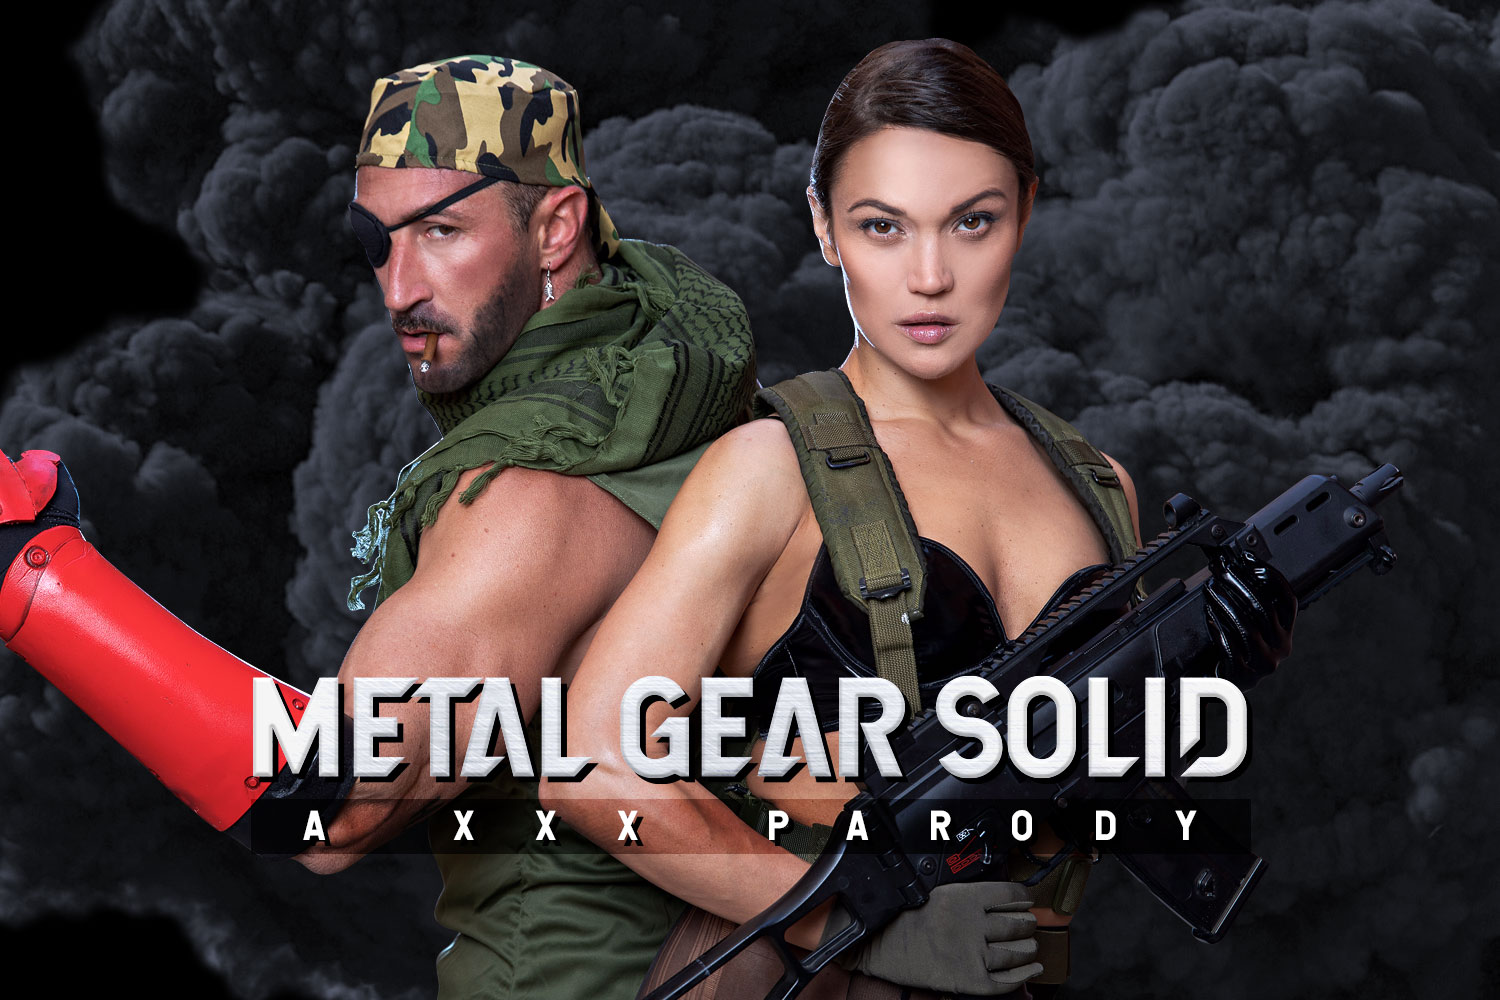 denise board recommends Metal Gear Solid V Porn